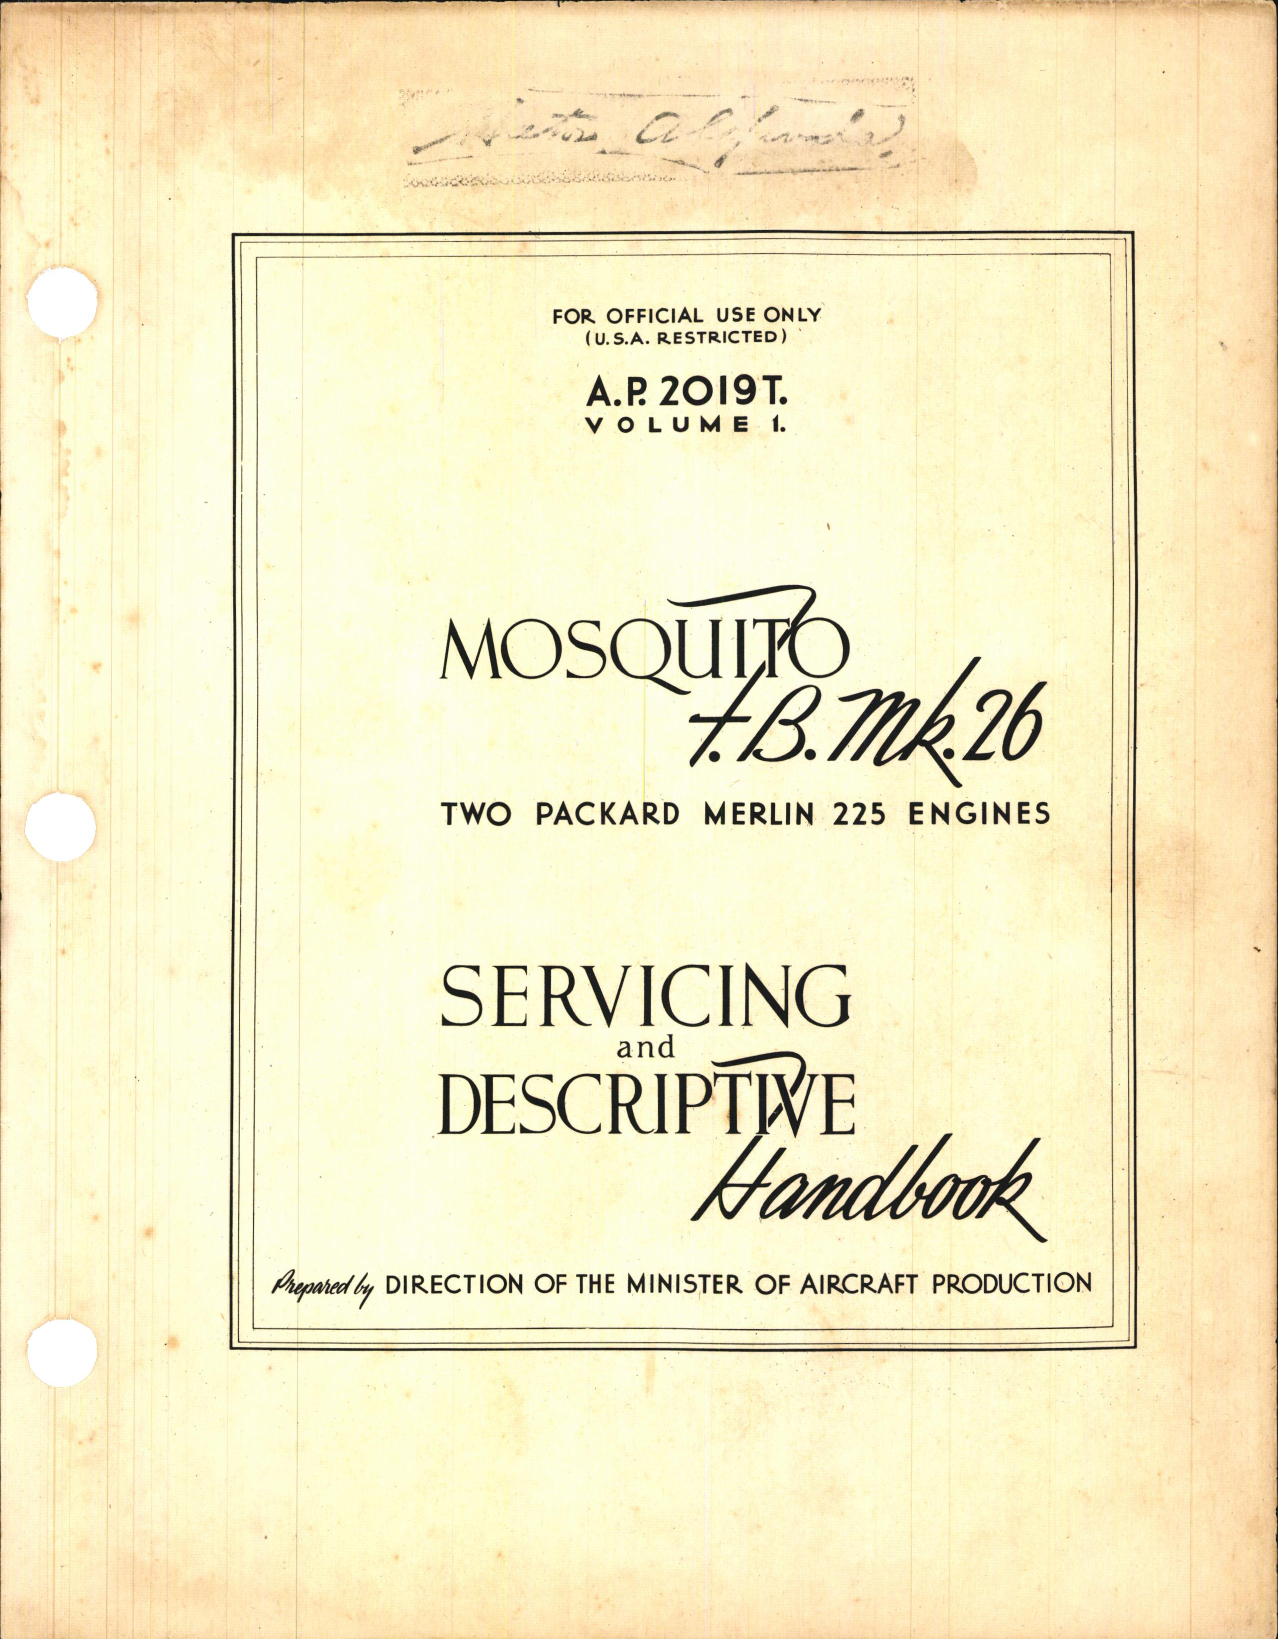 Sample page 1 from AirCorps Library document: Servicing and Descriptive Handbook for F.B. Mk. 26 Mosquito